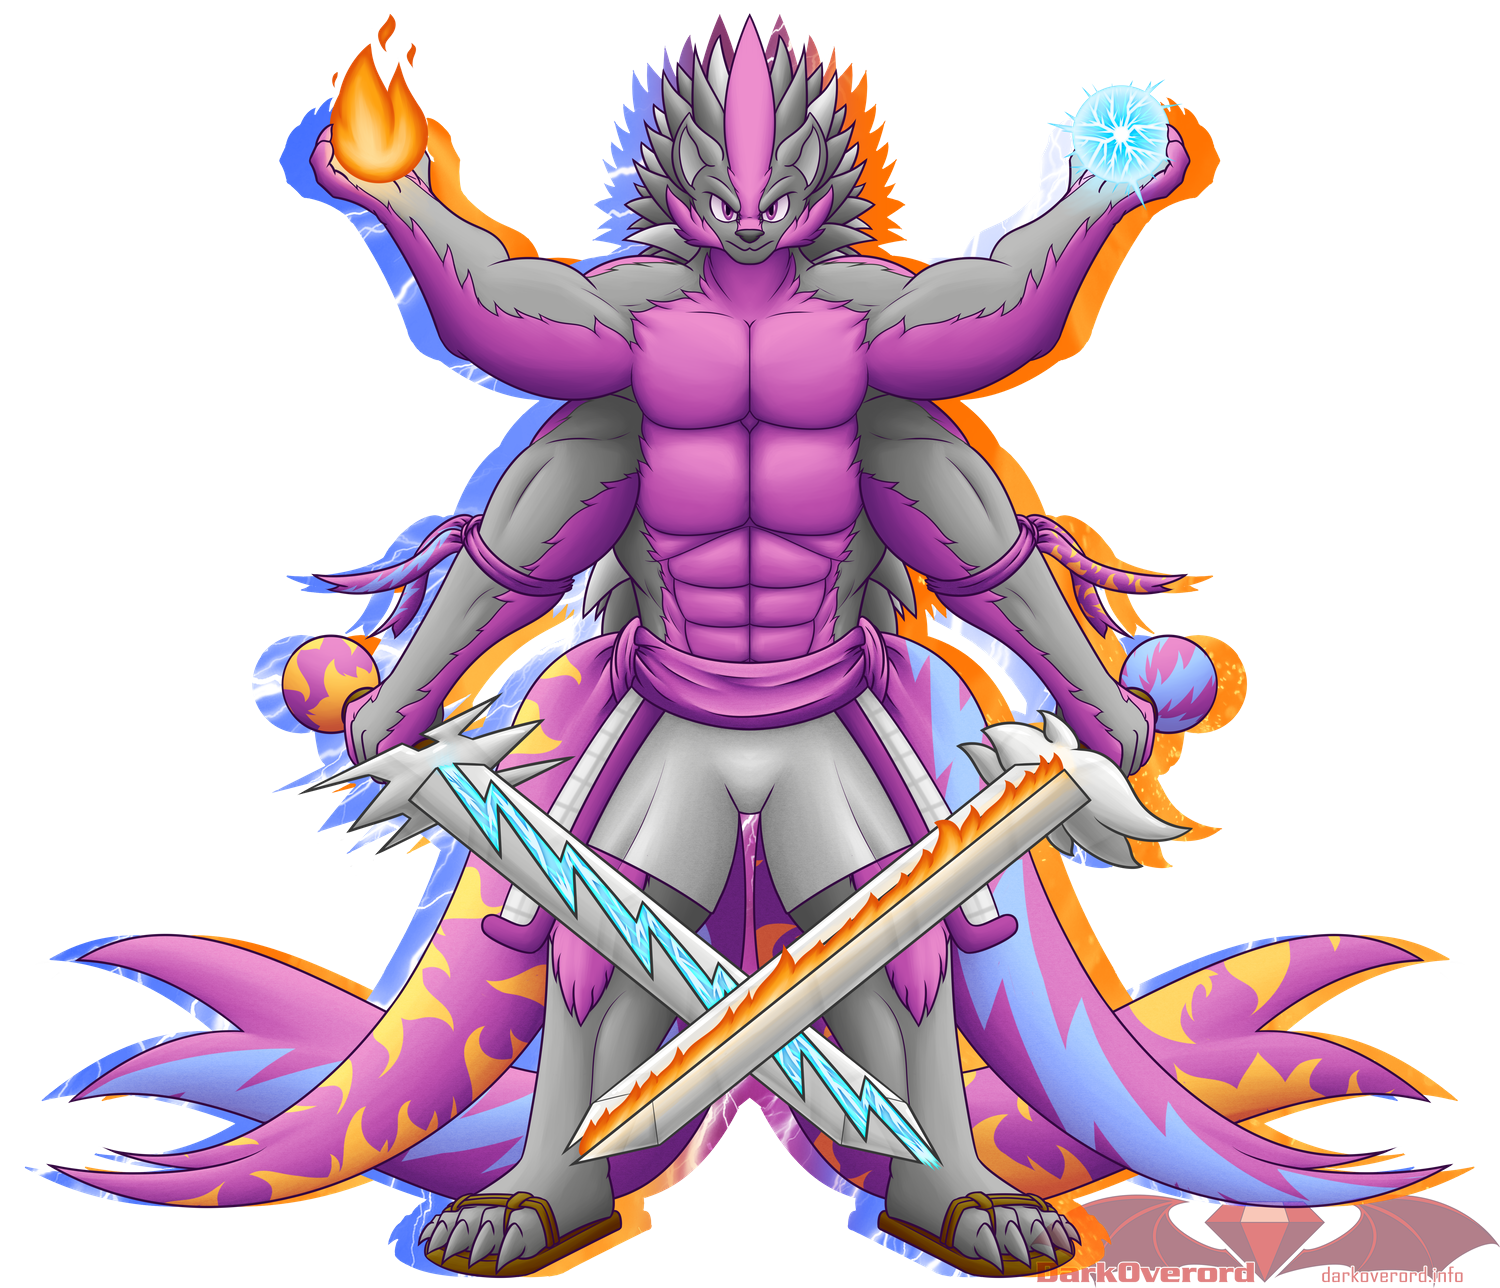 Adjuro Simul, a large muscular magical construct in the form of a four armed muscular grey tenrec with purple accents. Their top two limbs have their arms raised to their sides, a flame in their right hand, an orb of lightning in their left.

Their lower arms are holding swords, pointed downwards and in front of them so they cross over near their shins. They have a lightning based sword, with a fire design on the pummel, in their right hand, and a fire based sword, with a lightning design on the pummel, in their left.

Tied around their waist are two large purple sashes, where after the knot the material flows freely they have fire and lightning patterns.